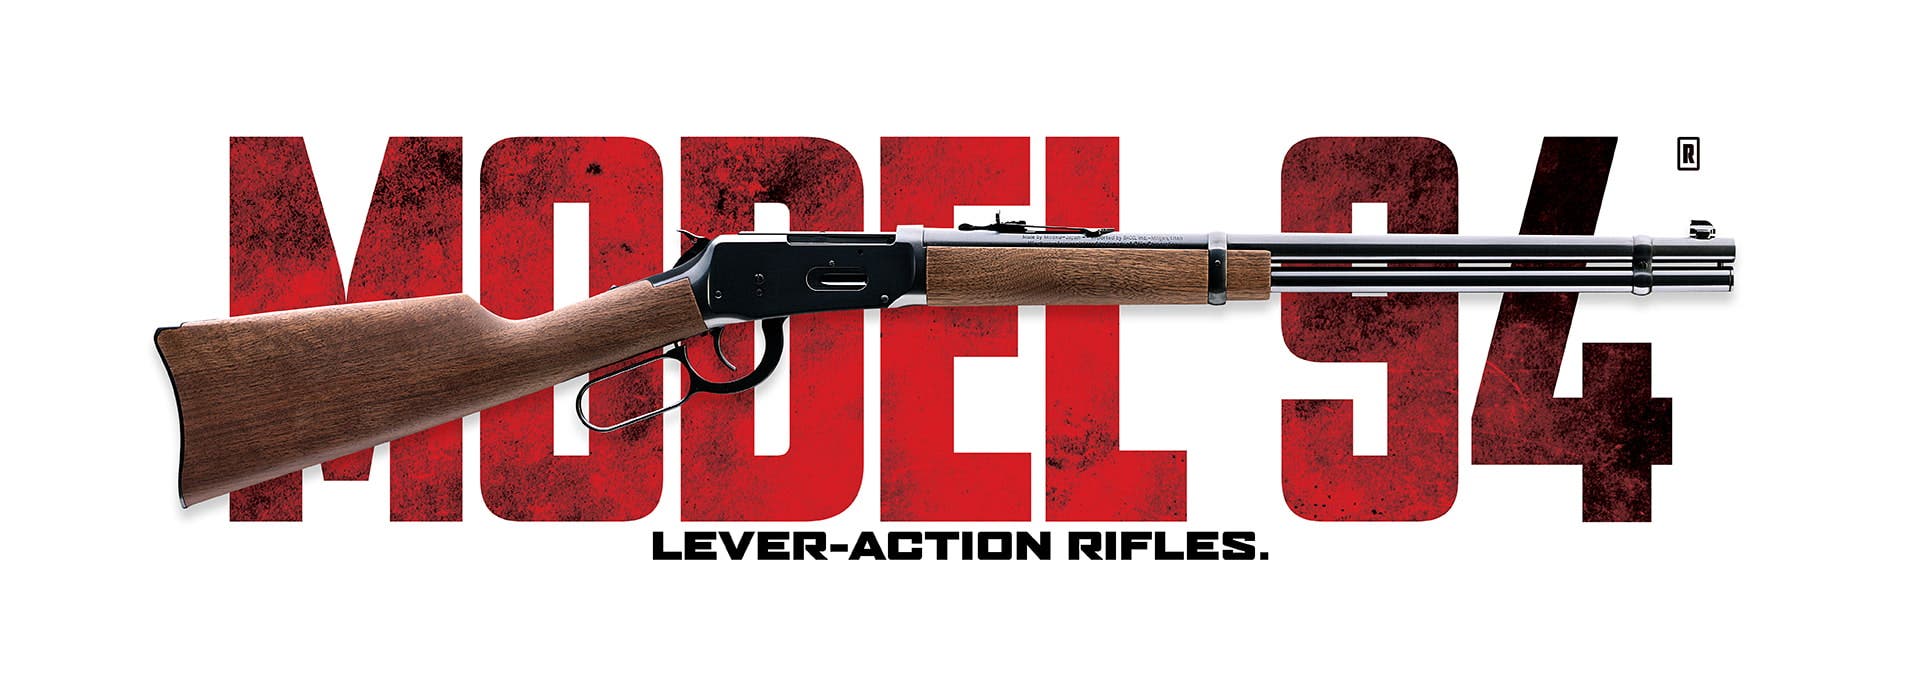 Model 94 lever-action rifle